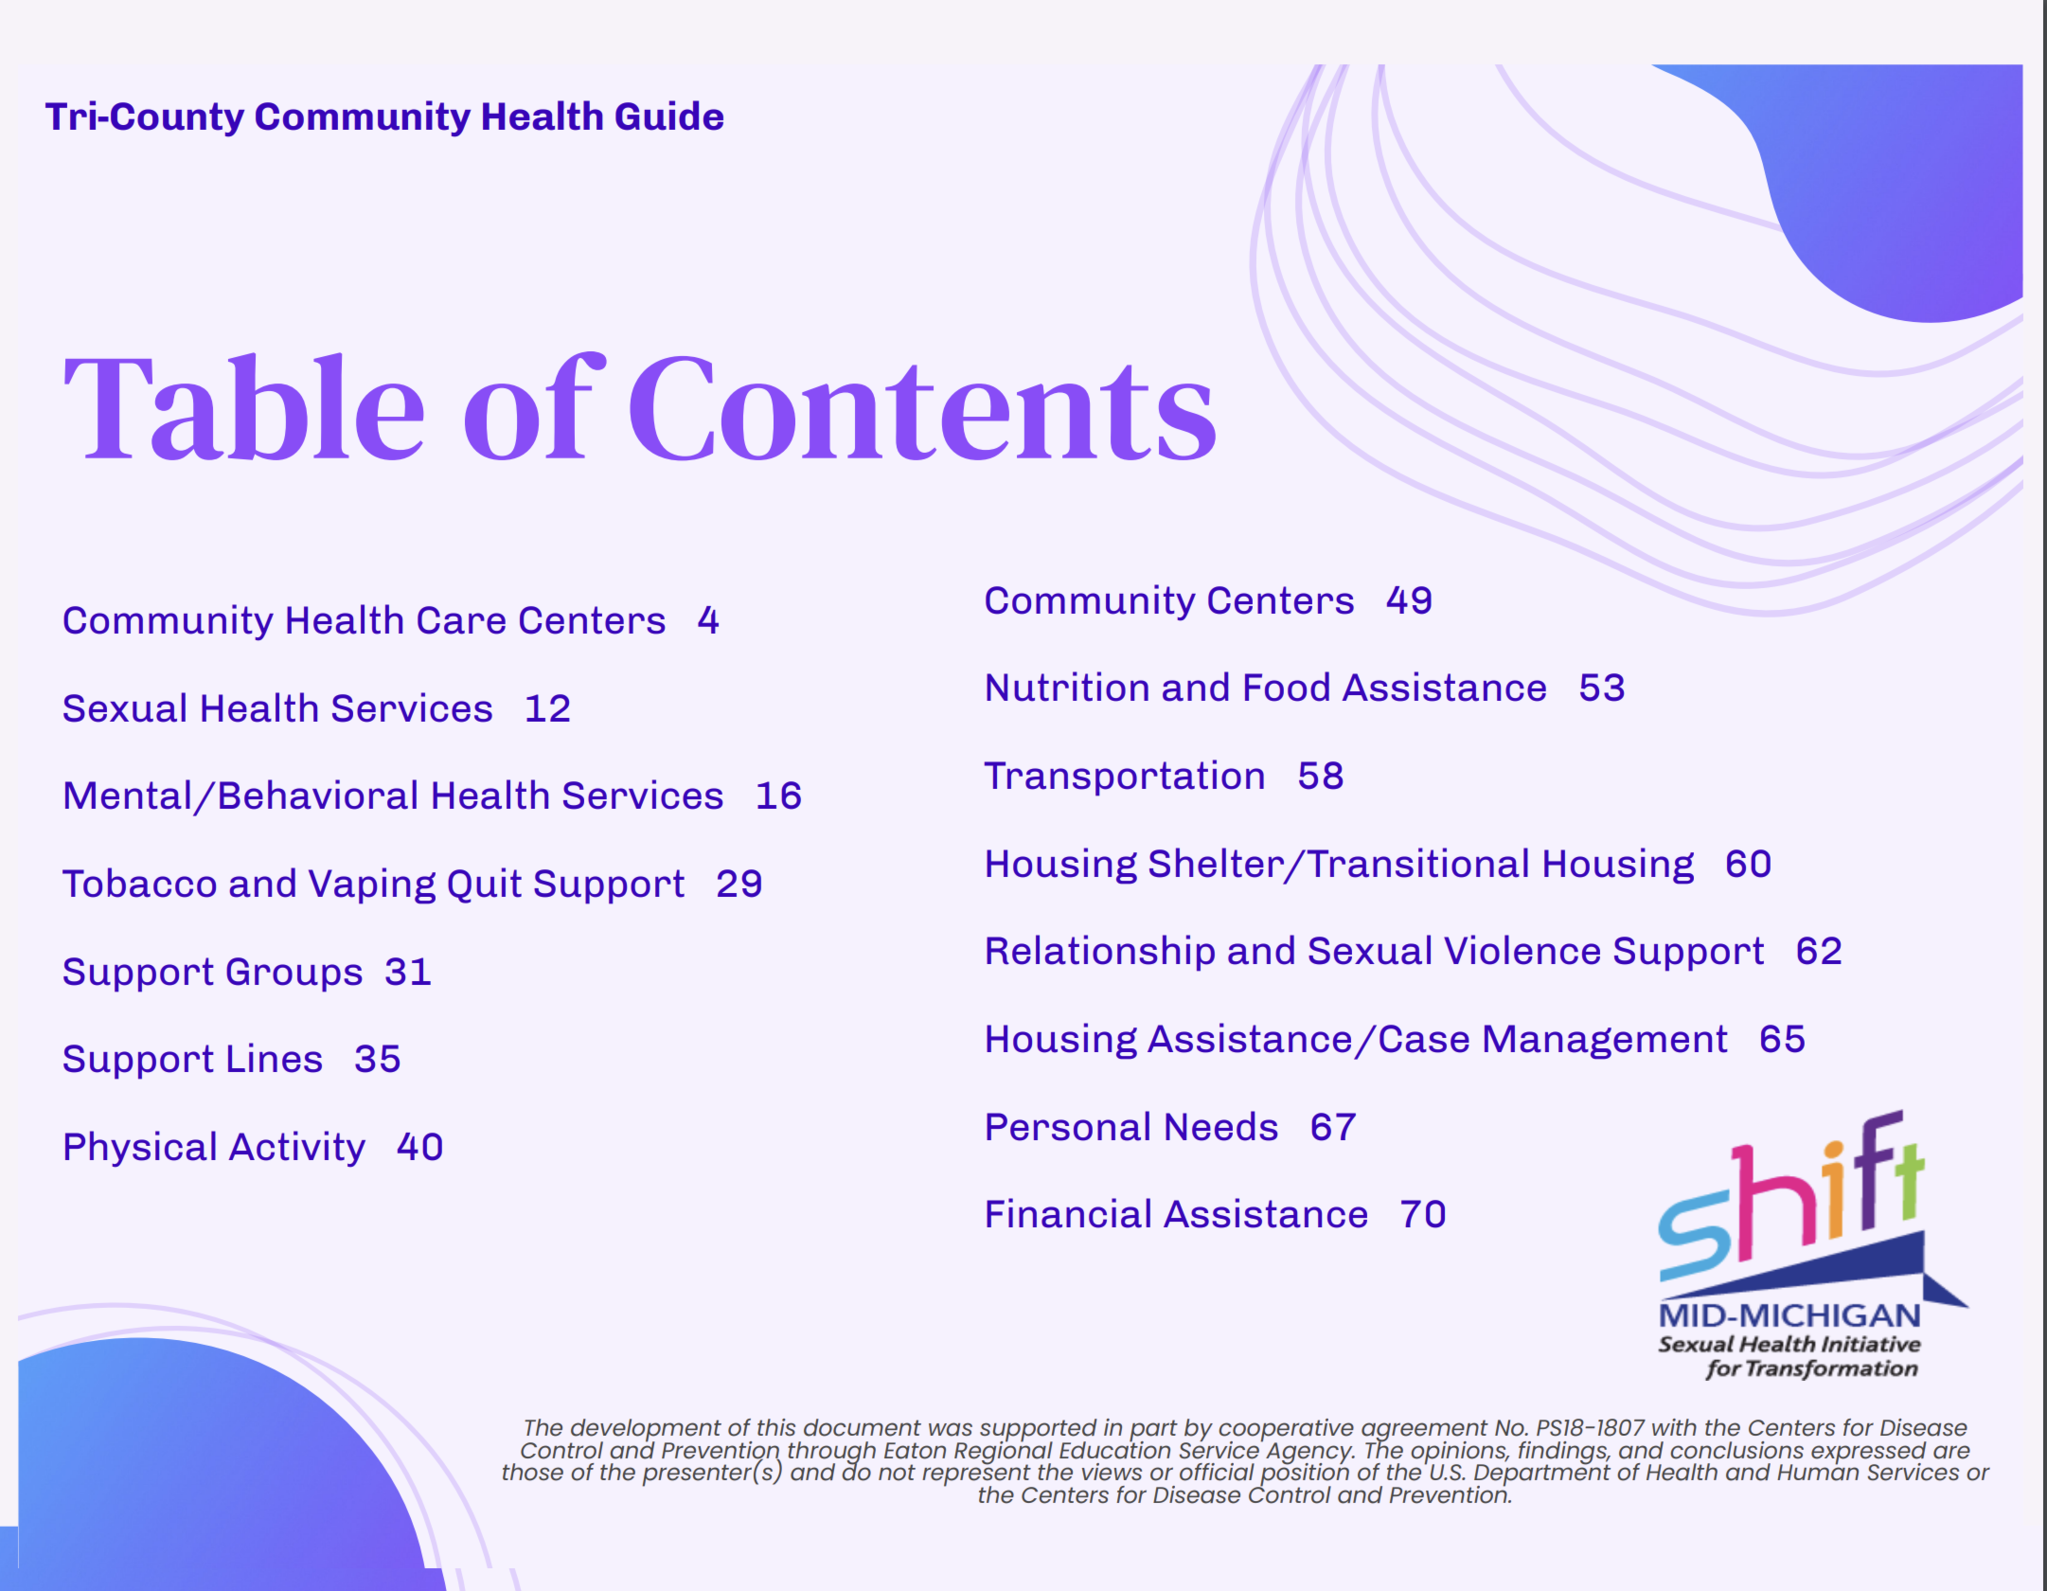 Table of Contents for Tri-County Community Health Guide